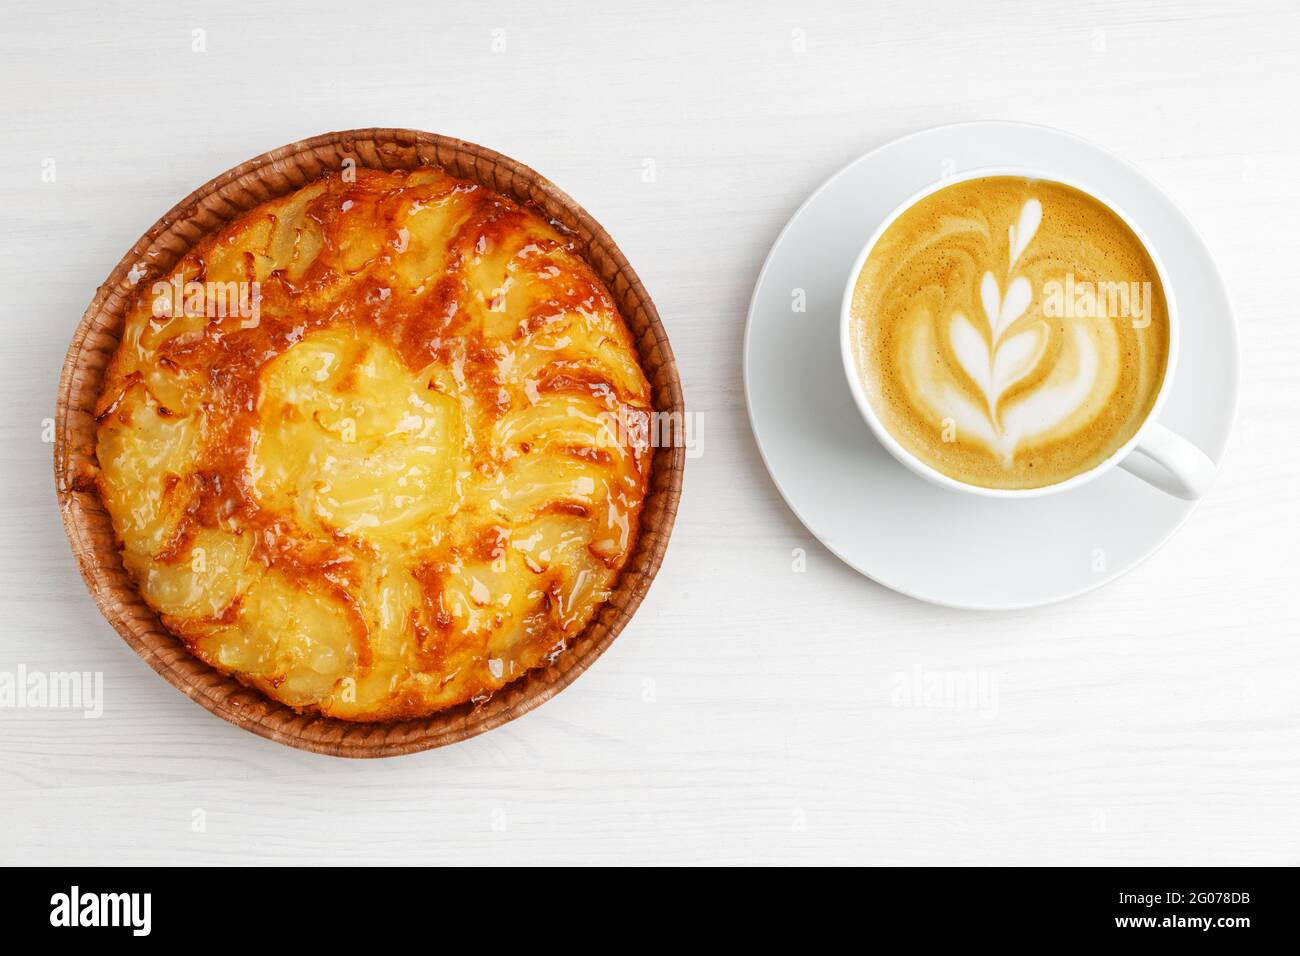 Homemade pie with apples and pears with cup of coffee cappuccino on white wooden table. Top view. Stock Photo